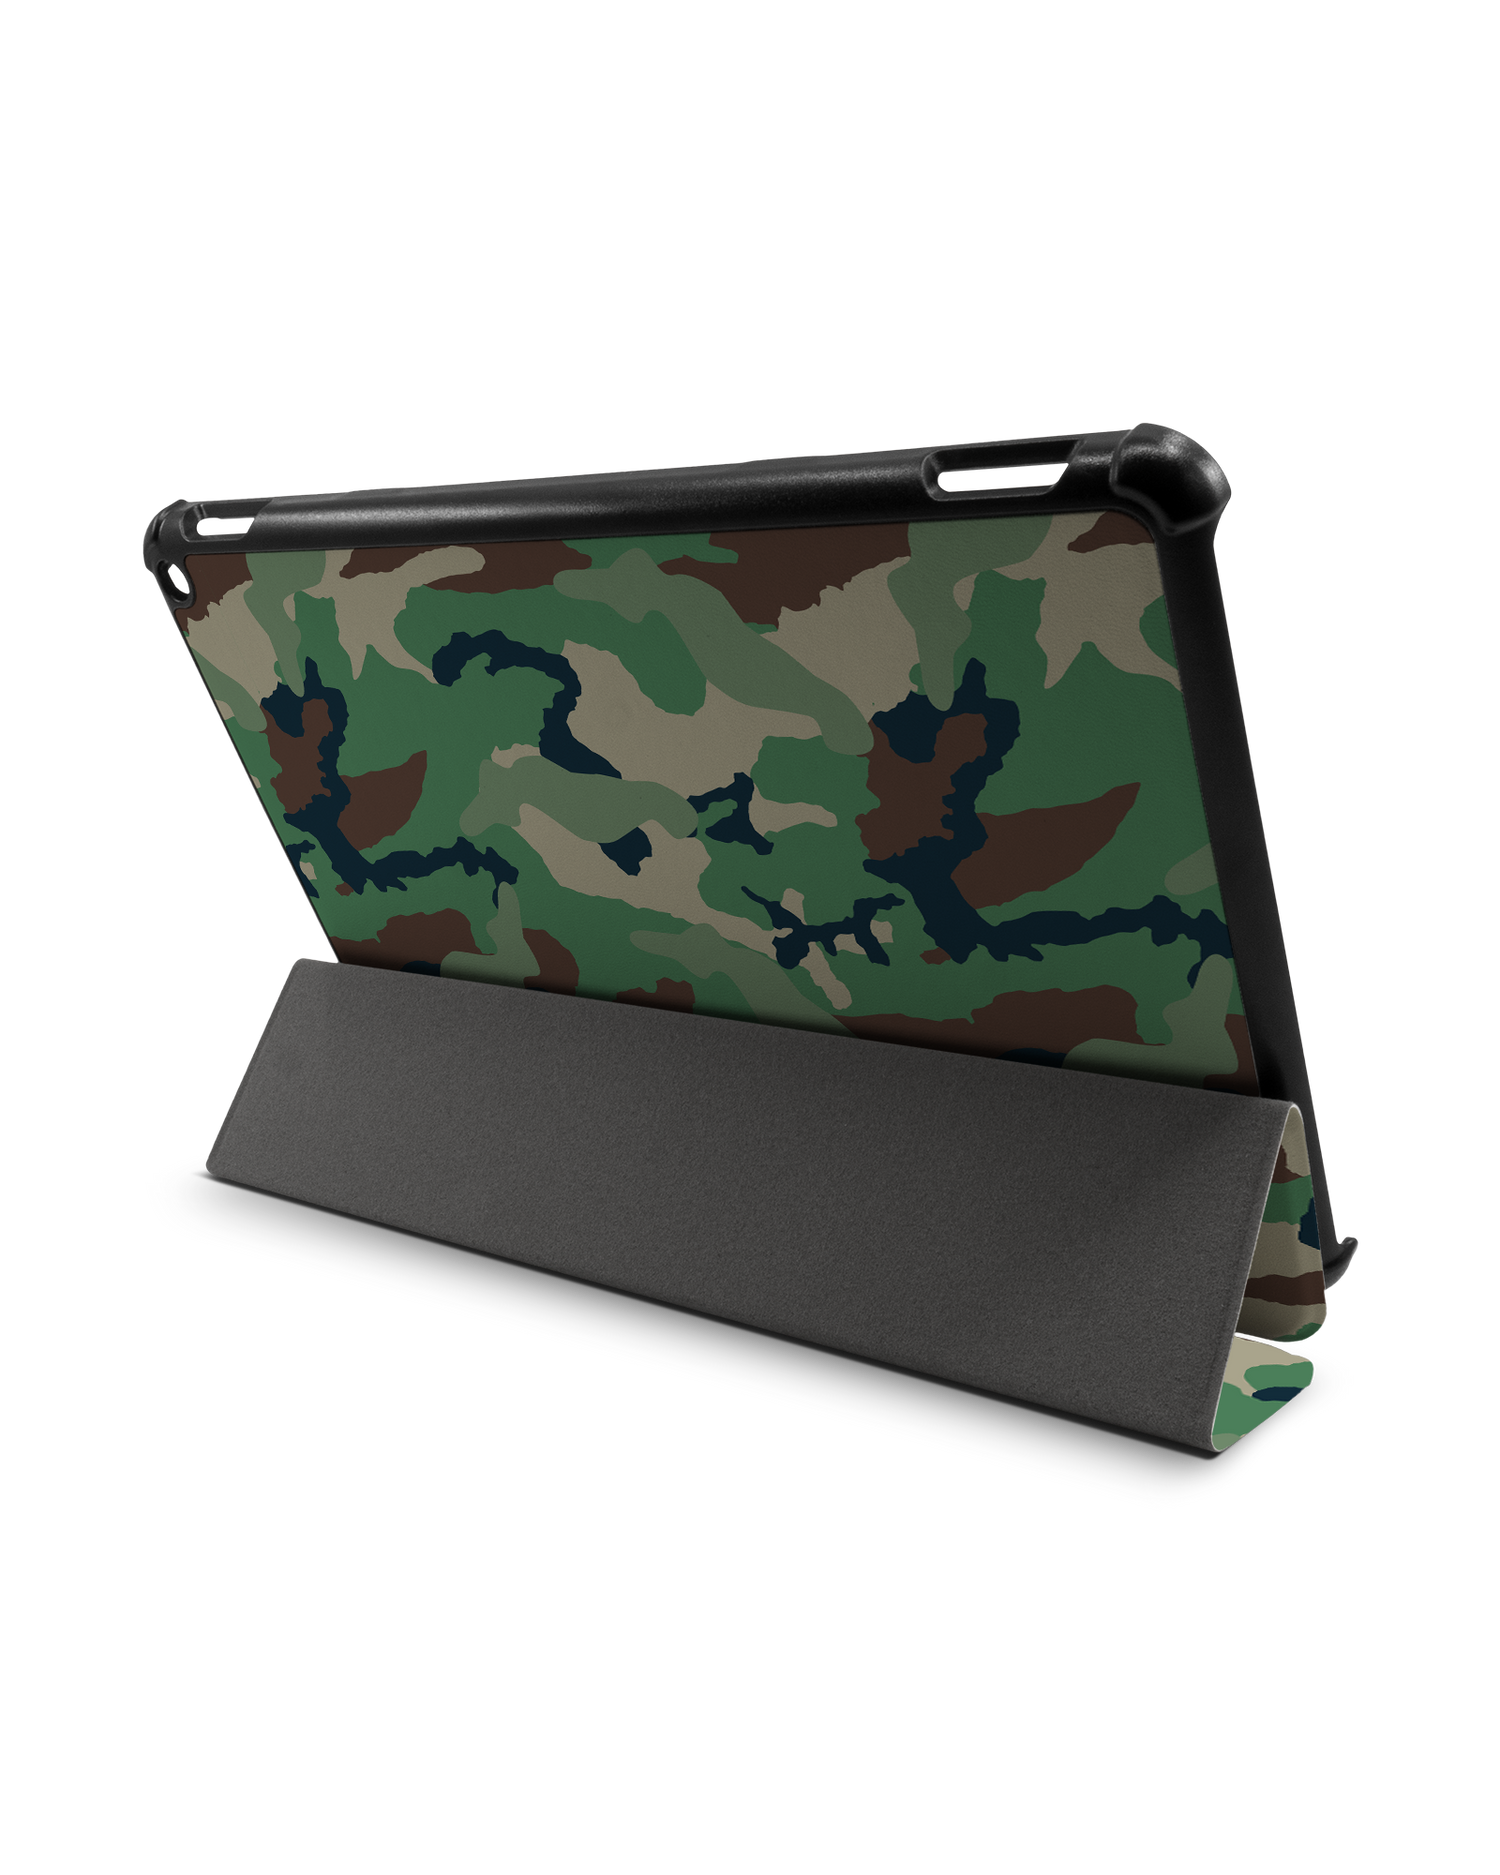 Green and Brown Camo Tablet Smart Case for Amazon Fire HD 10 (2021): Used as Stand